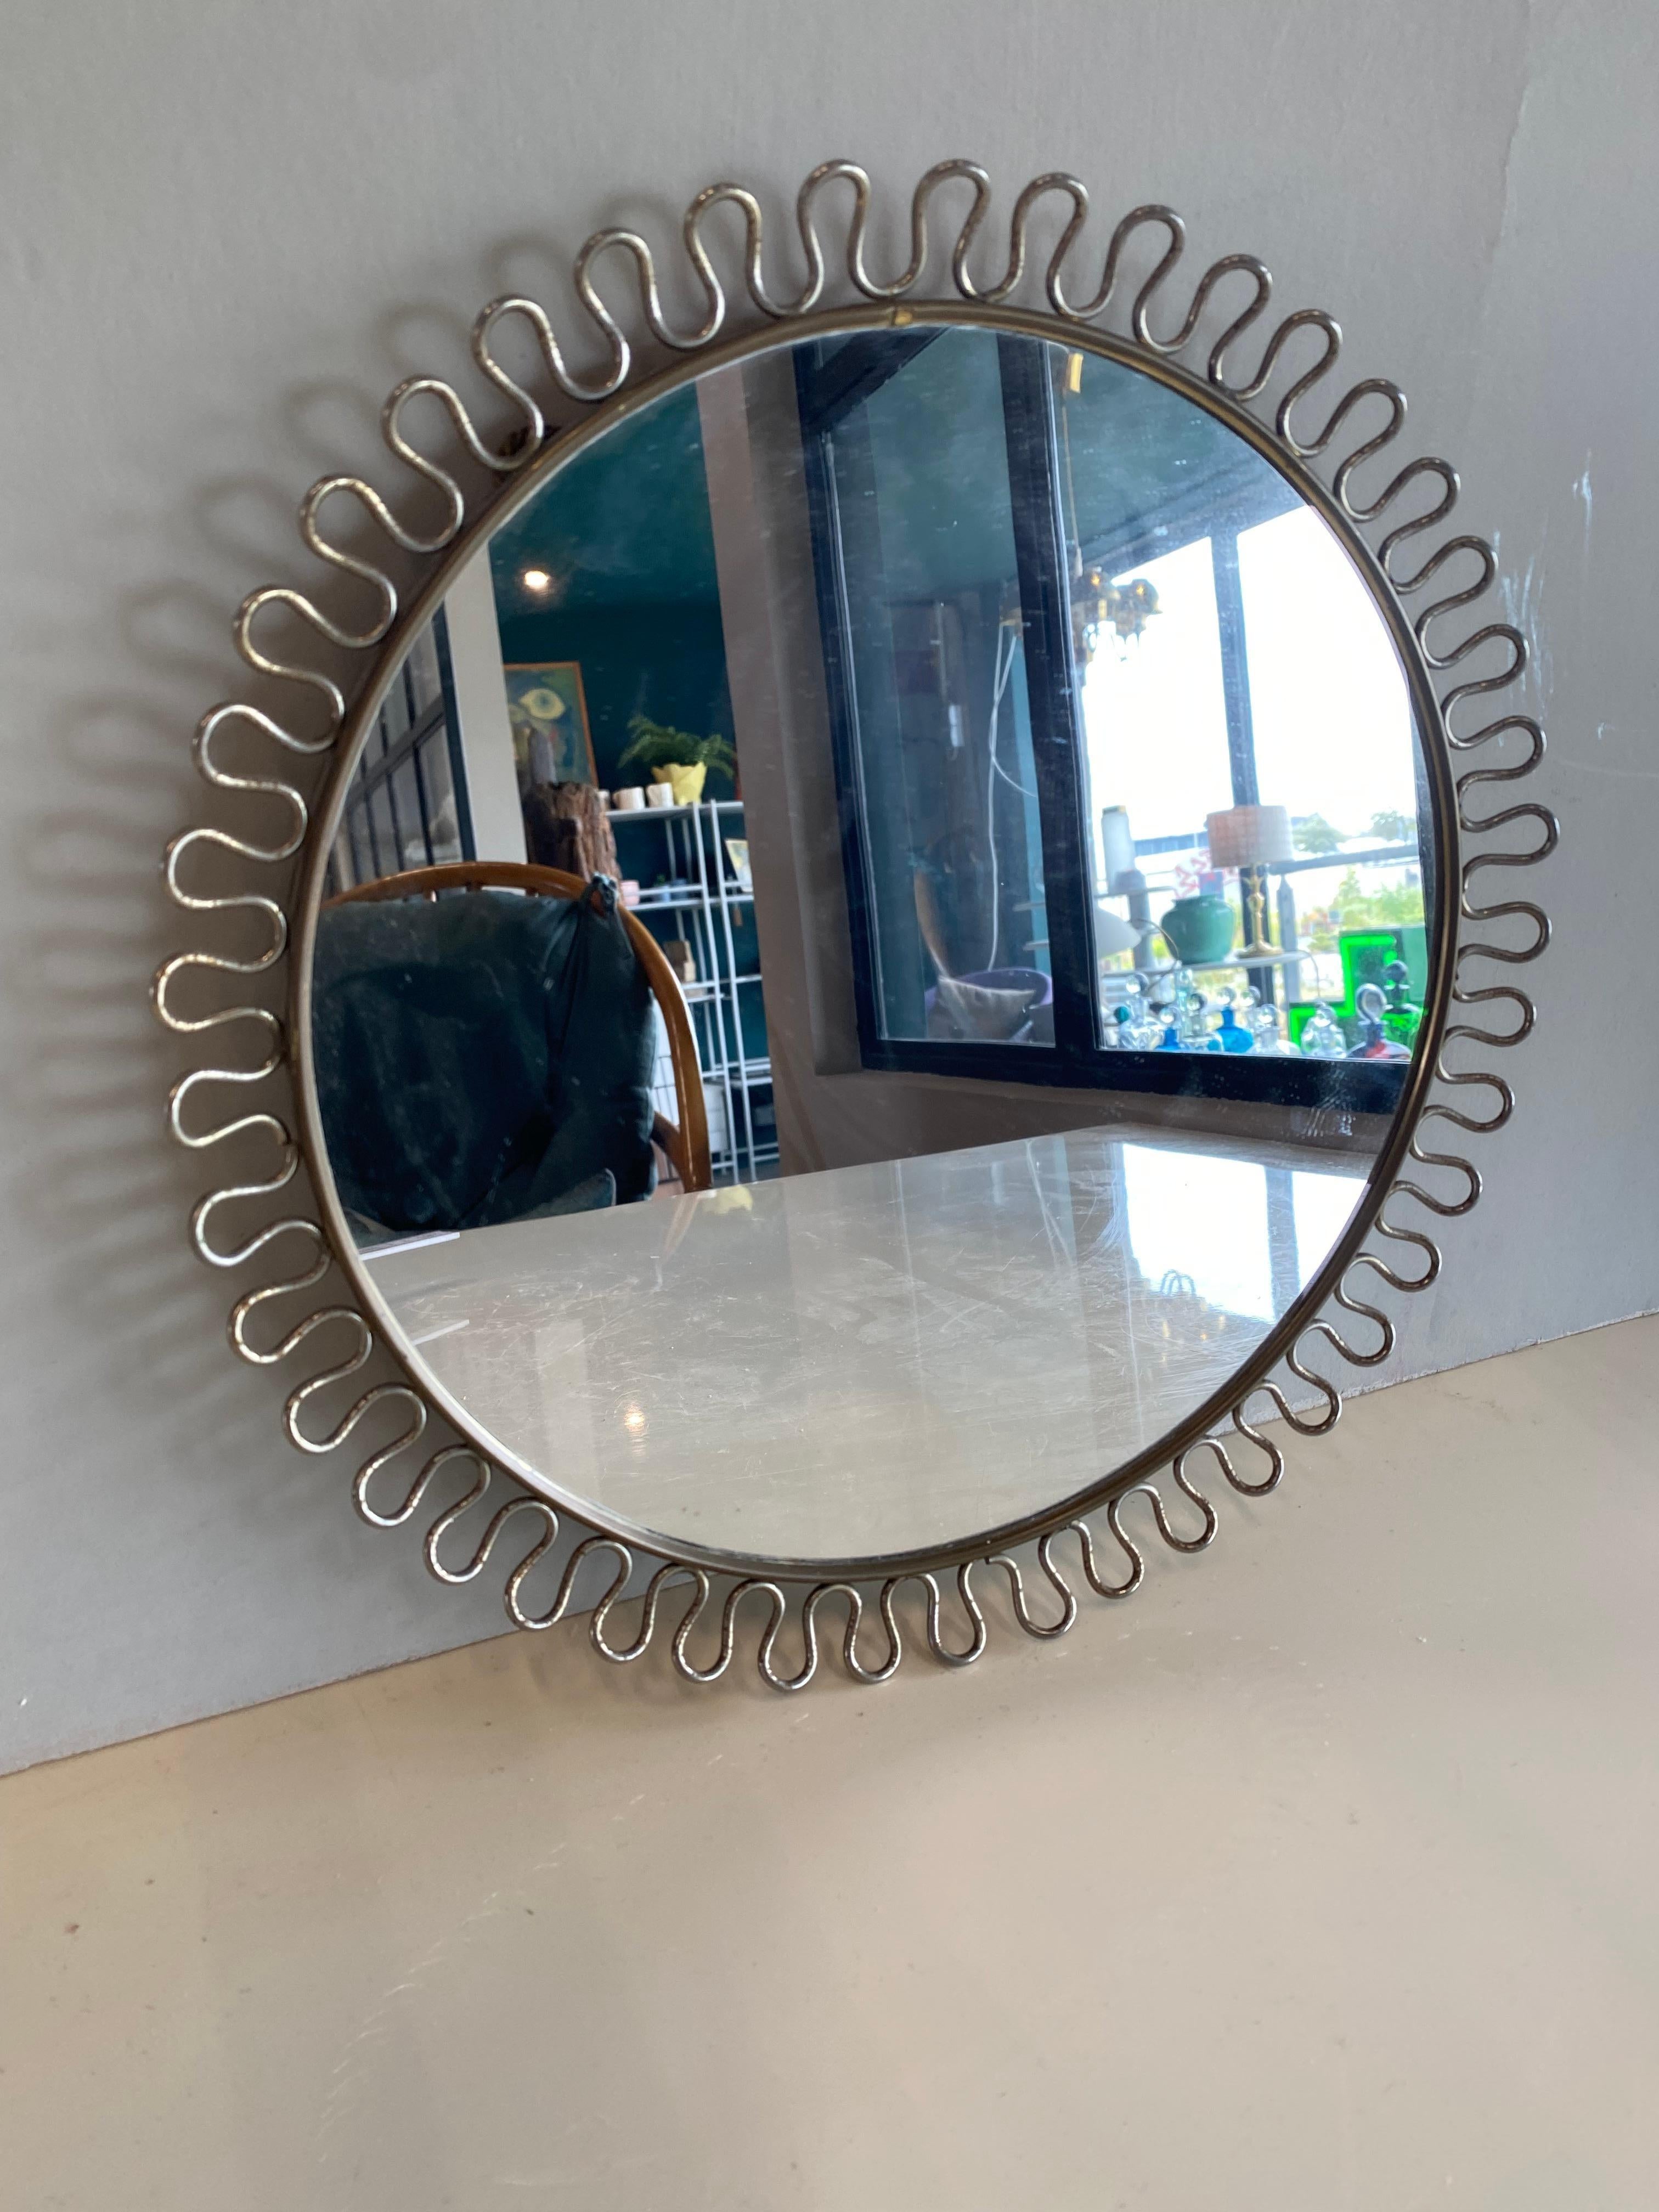 This small mid century mirror by Joseph Frank was designed and manufactured for Svenskt Tenn during the 1950s.
It is made of brass and has an original cord for hanging.
 Josef Frank was born in Austria in 1885. He was an architect, a designer,